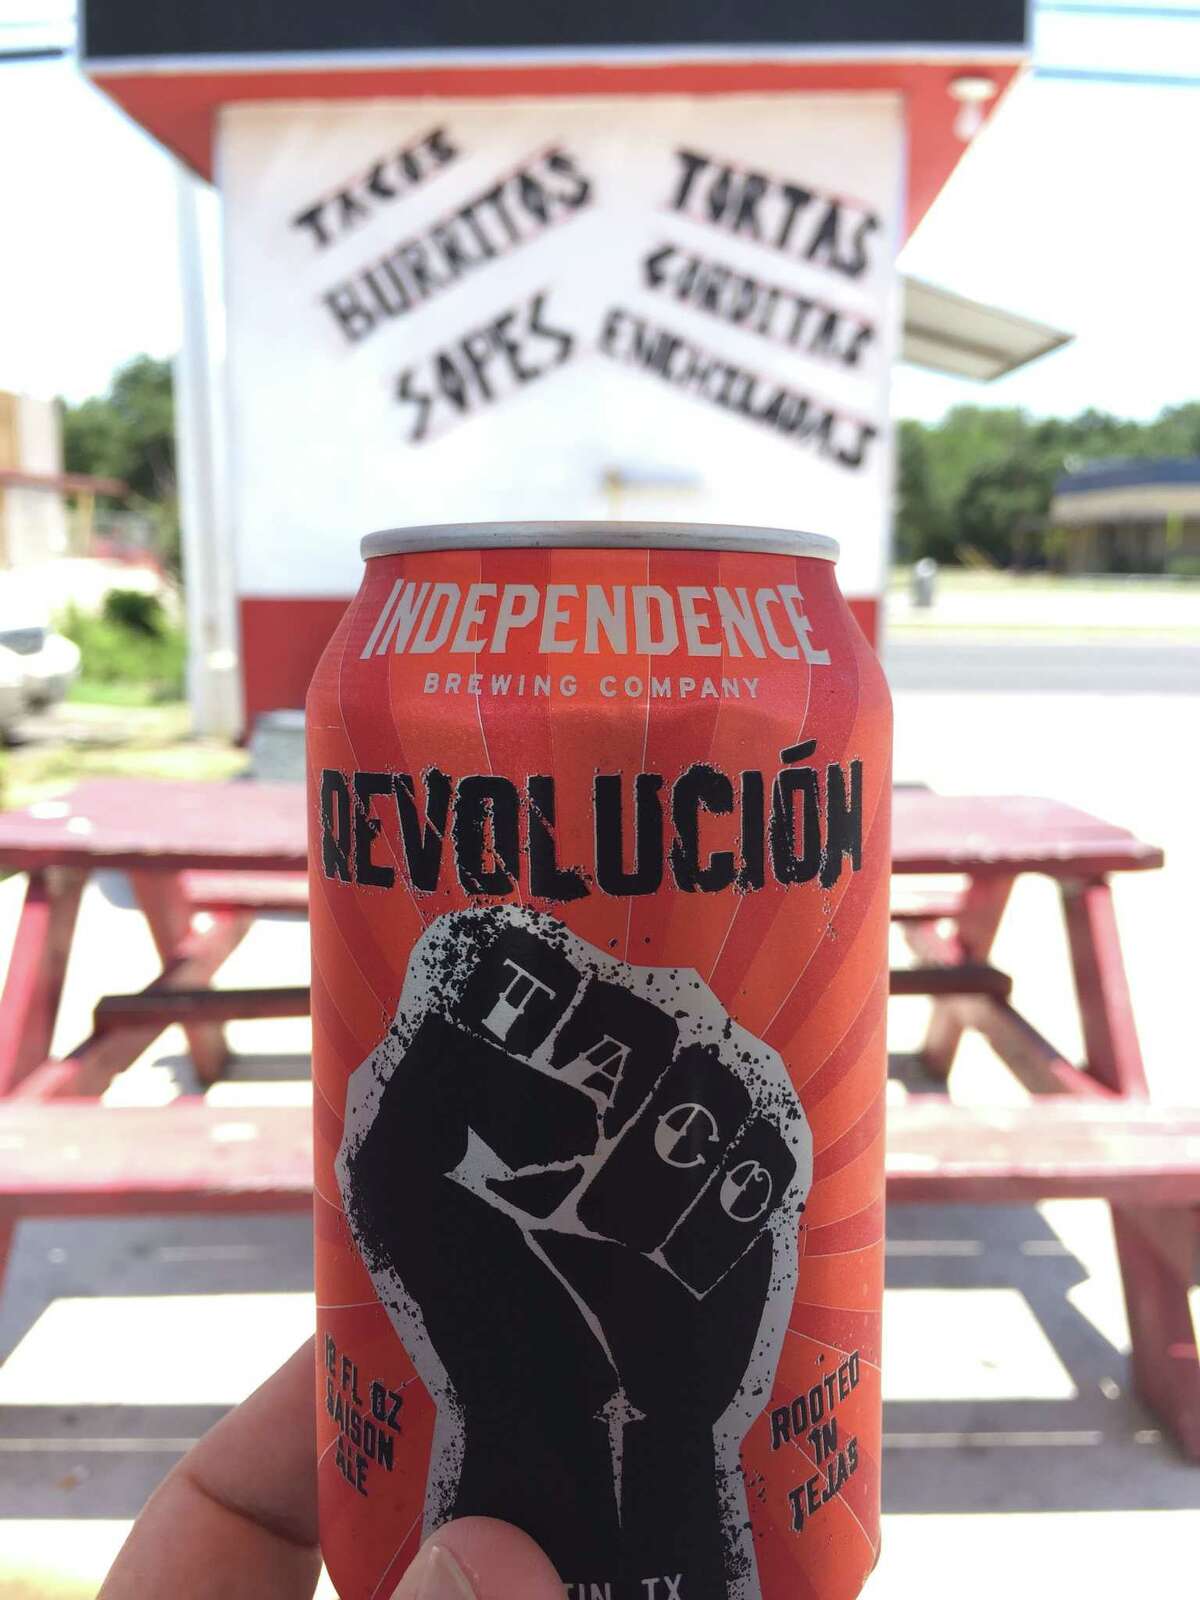 Independence Brewing has launched RevoluciÃ©³n Saison Ale, a beer meant to pair well with tacos.